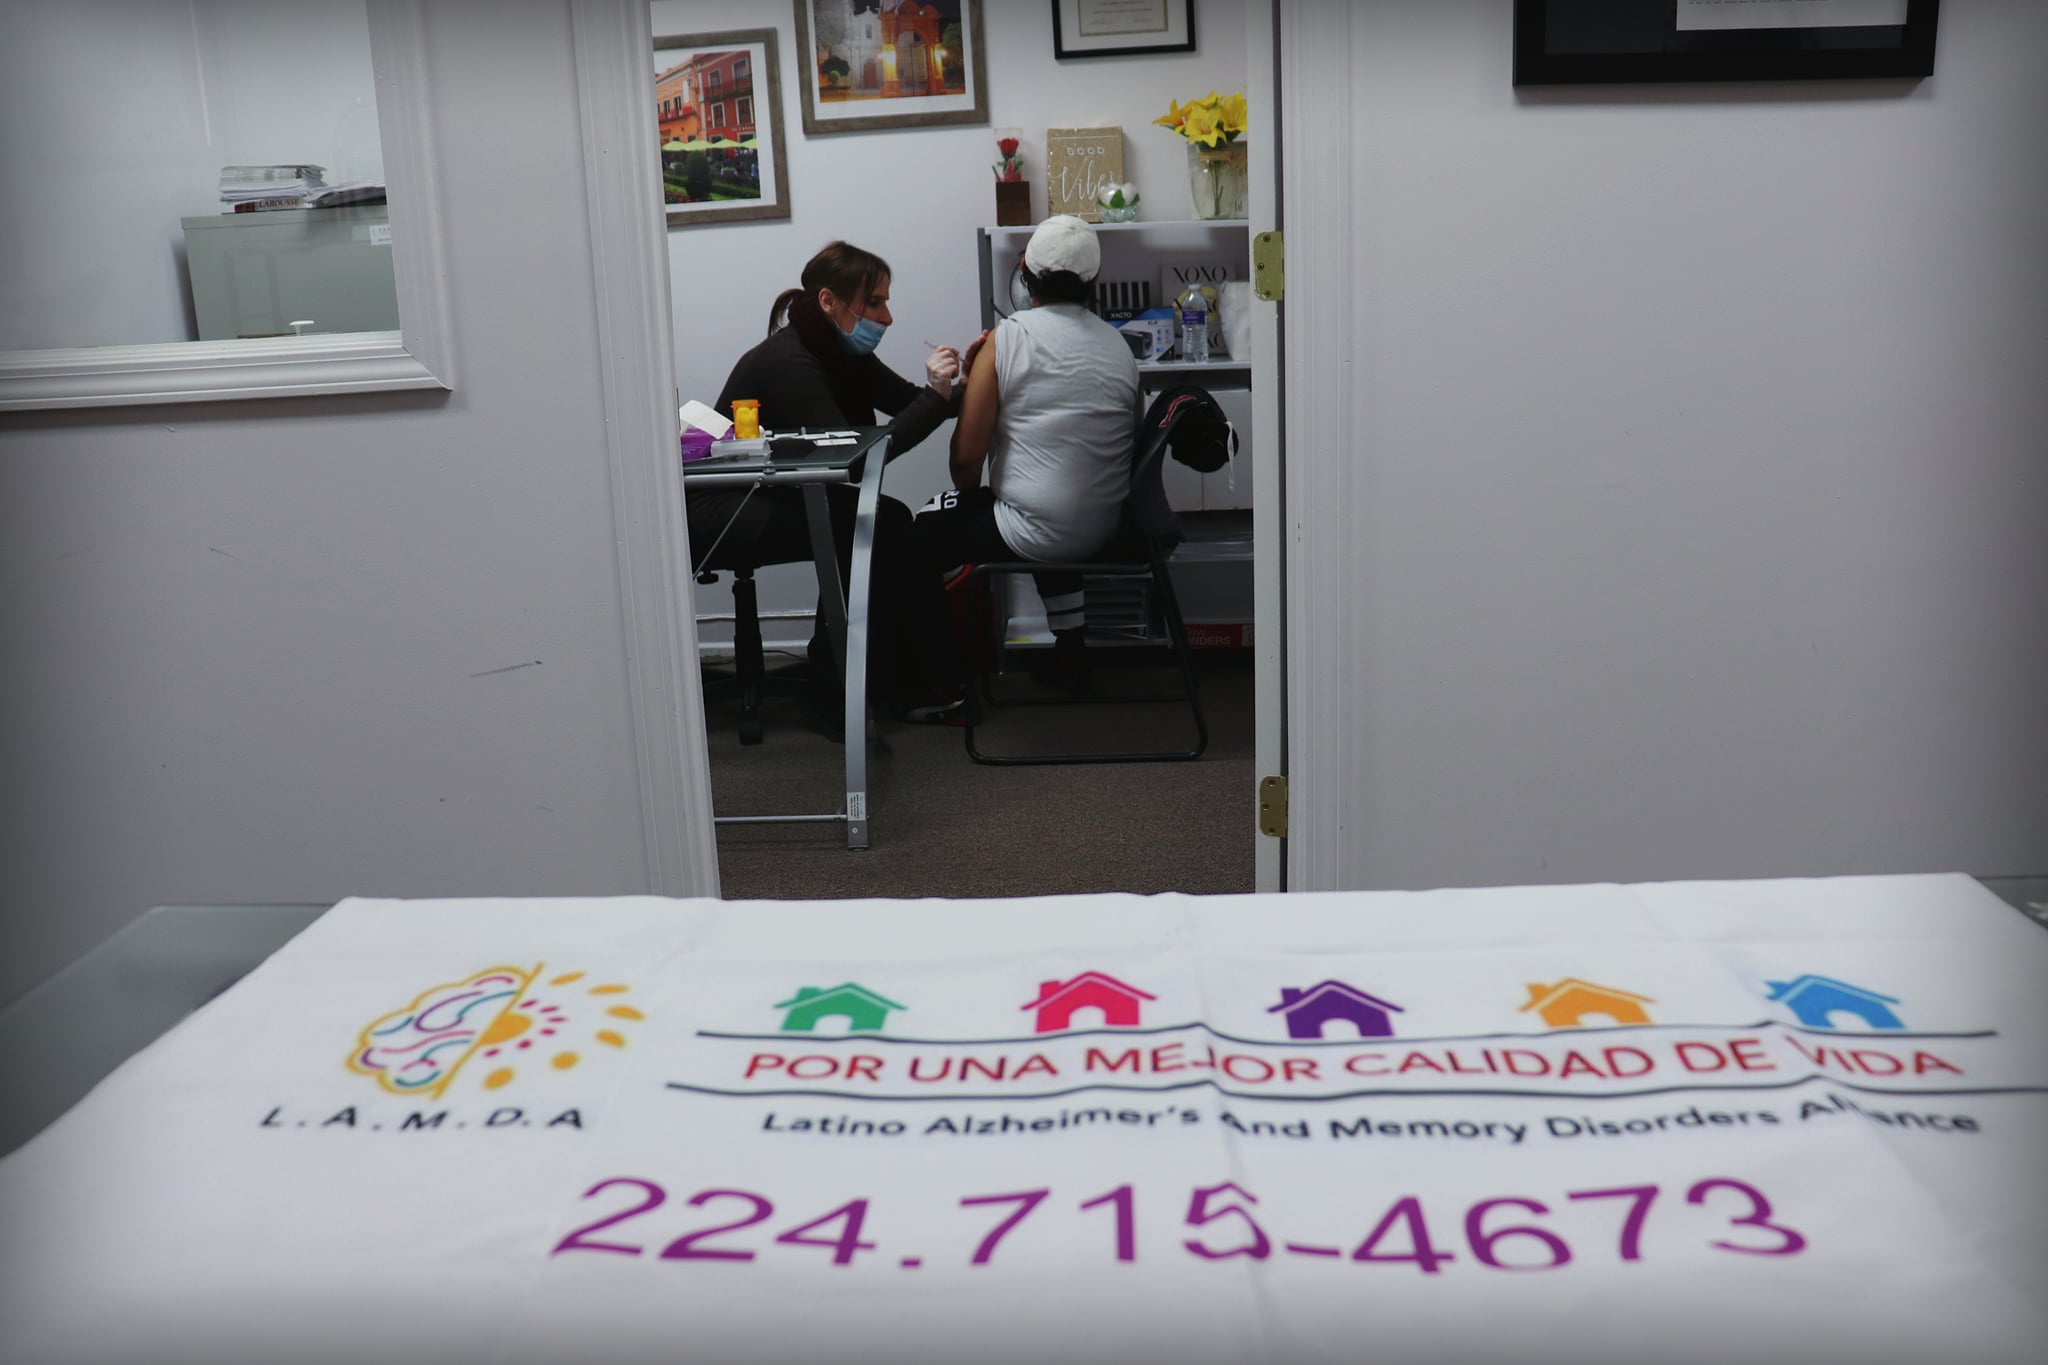 A woman administers a vaccine behind a table with a LAMDA banner